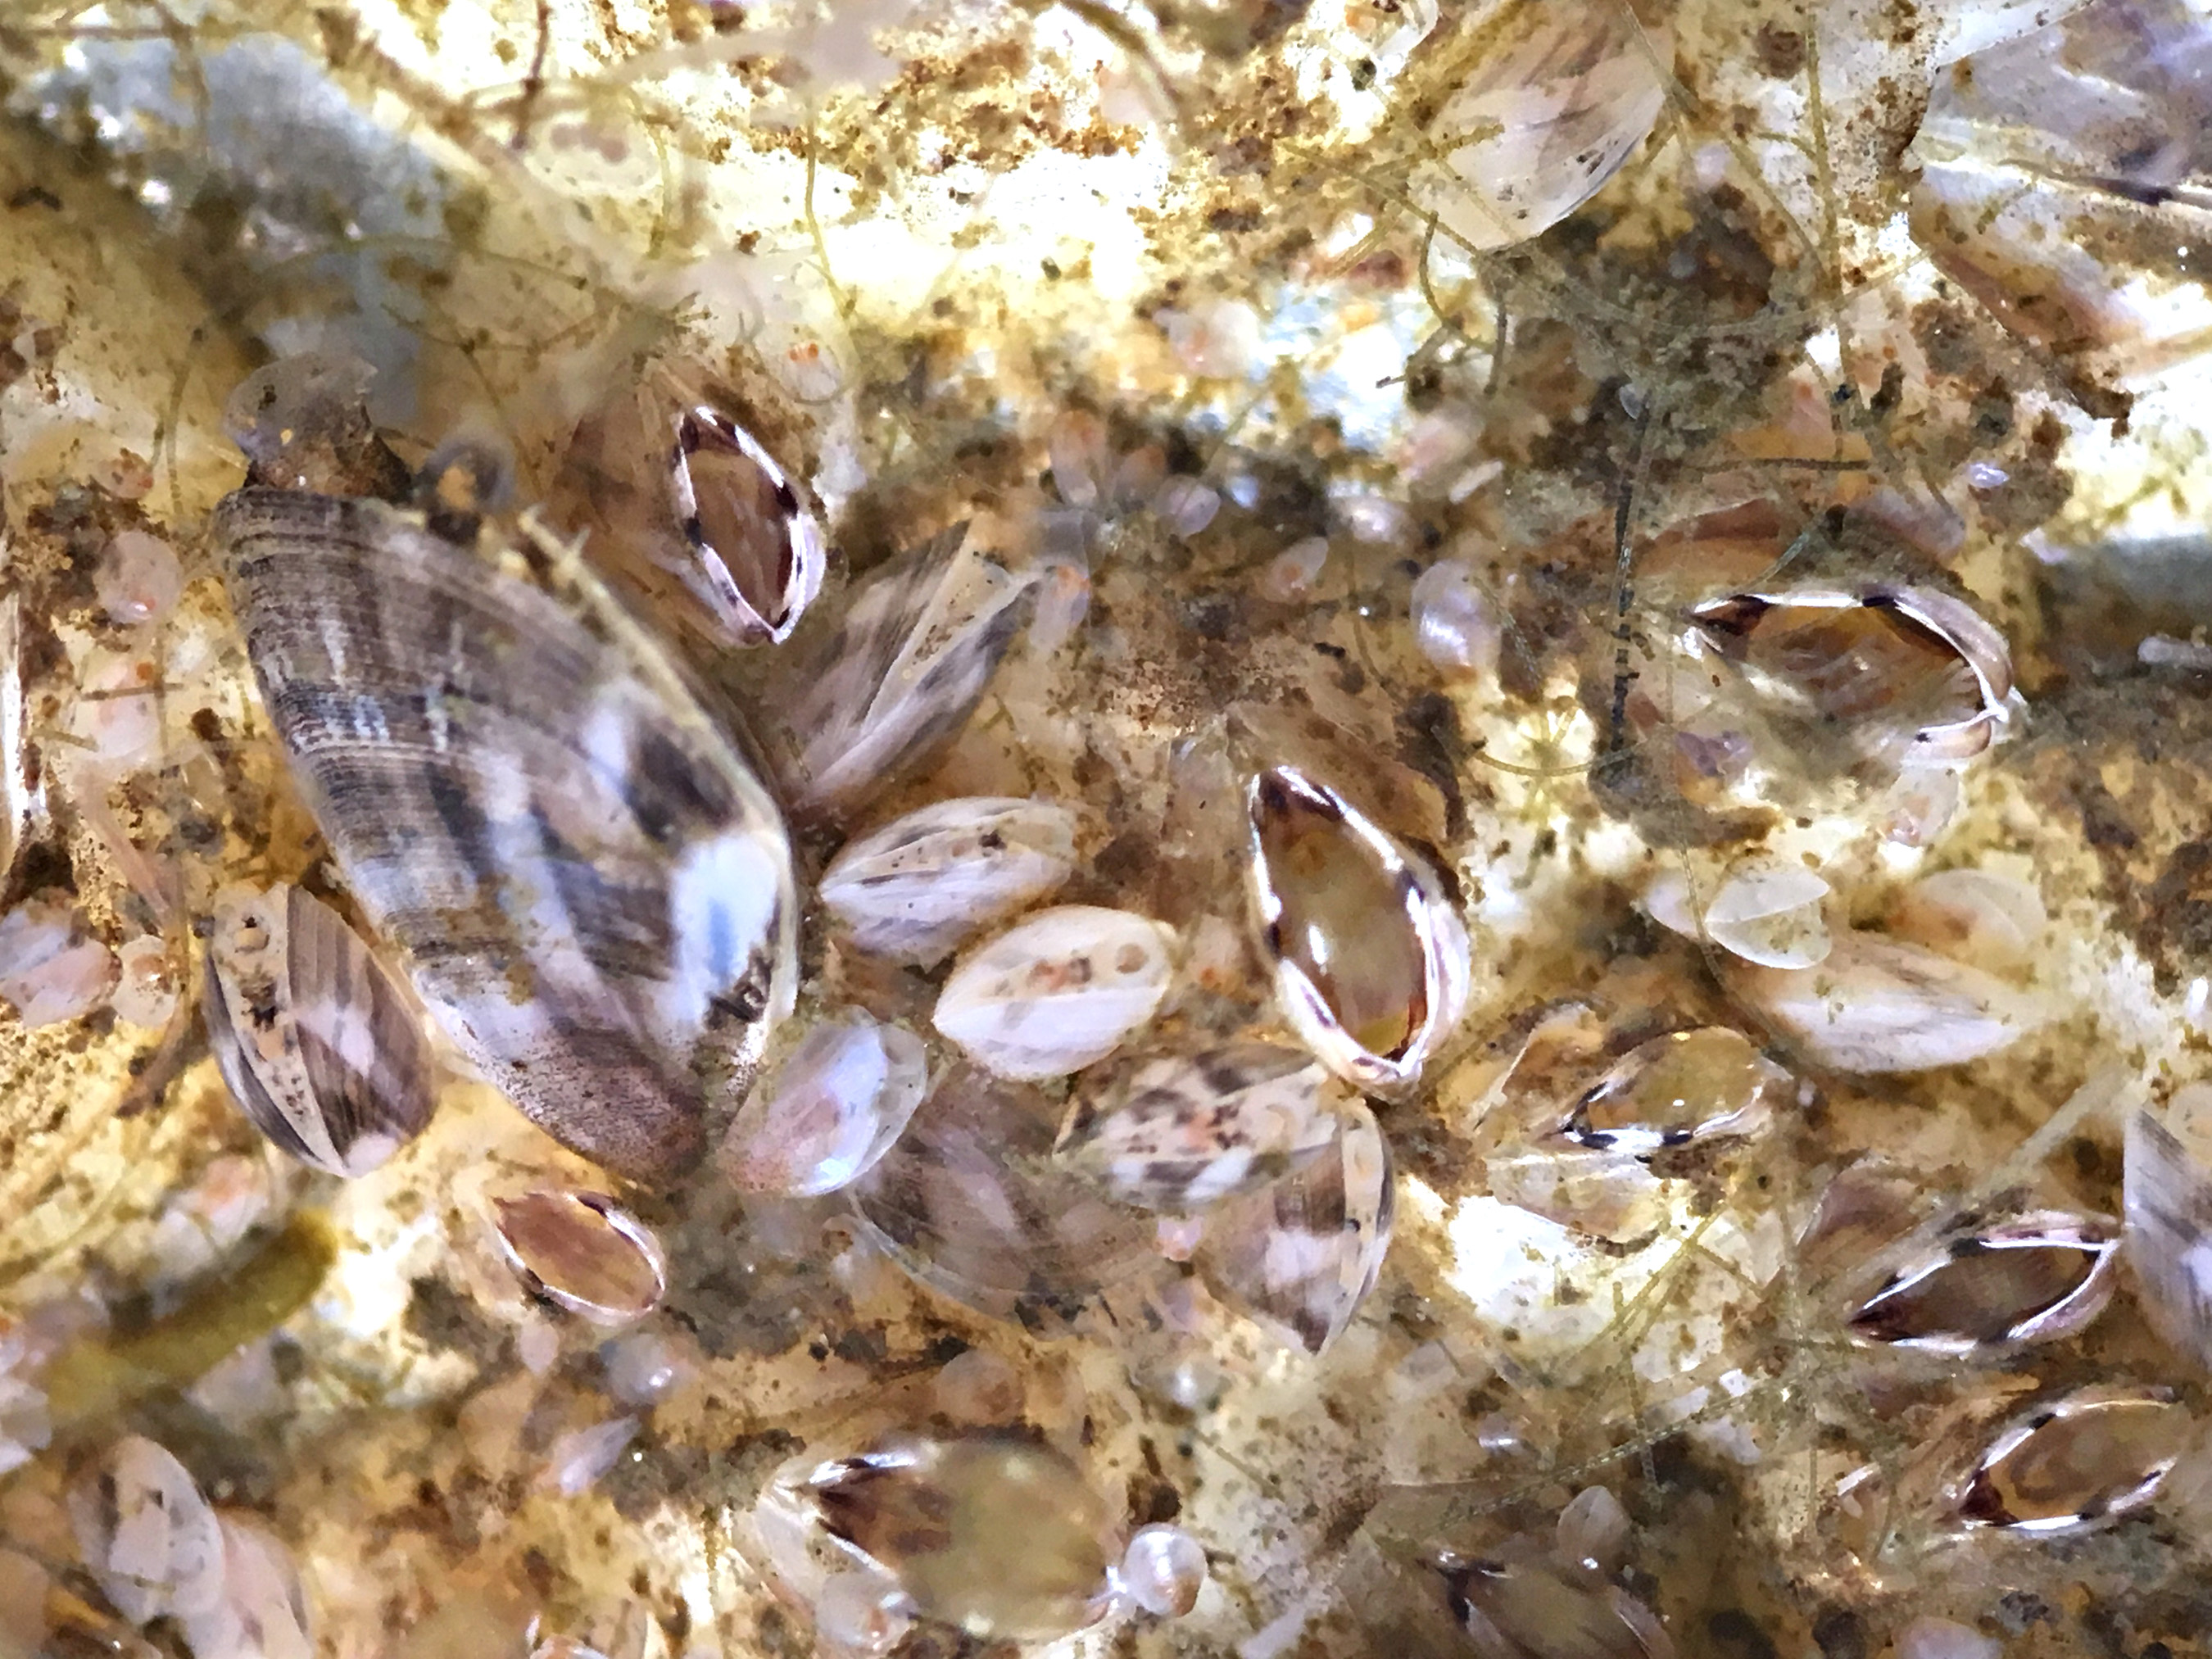 A group of round-shaped Barnacles